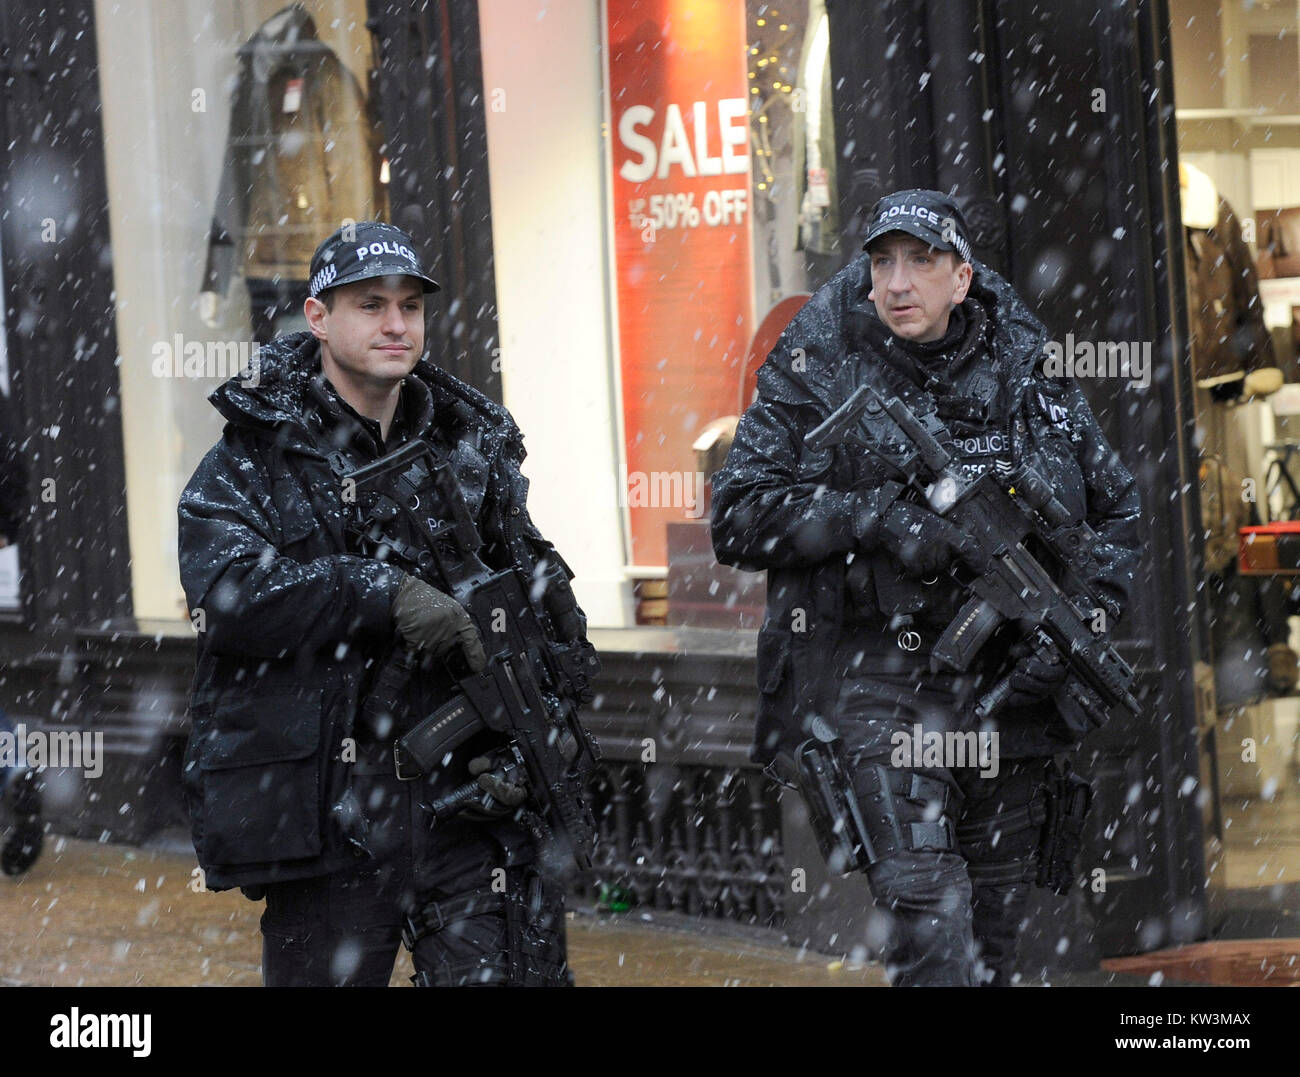 Armed Police from the North Yorks Police Fire Arms Section patrol York in the snow after Britain saw one of the coldest nights of the year with temperatures falling to minus 12.3C at Loch Glascarnoch in the Scottish Highlands overnight and heavy snow expected over part of the north of England. Stock Photo